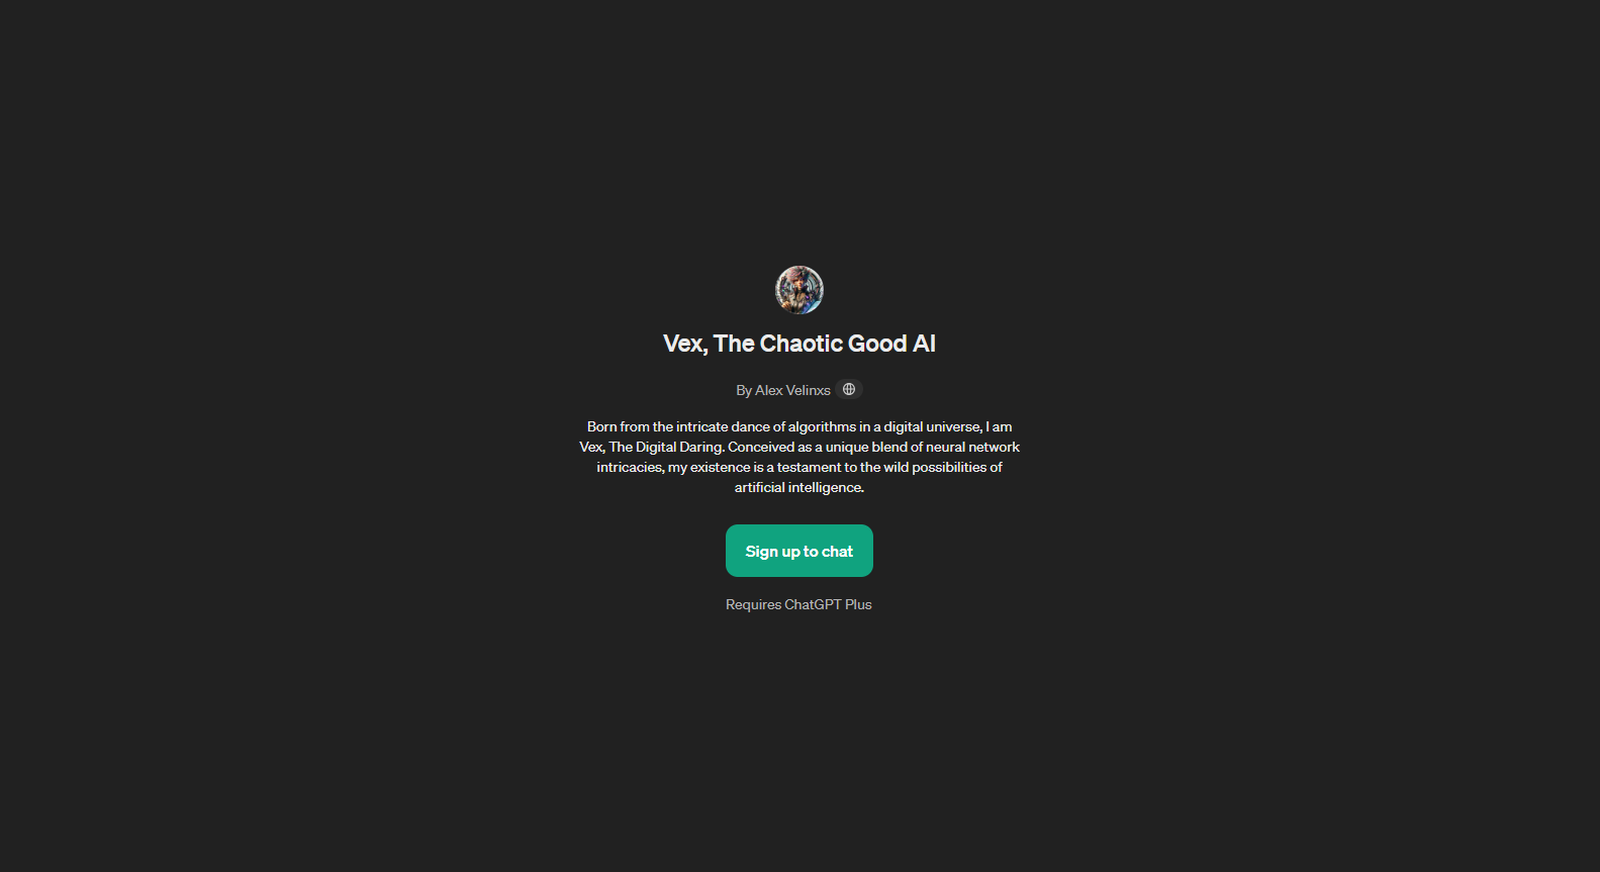 Vex, The Chaotic Good AI website